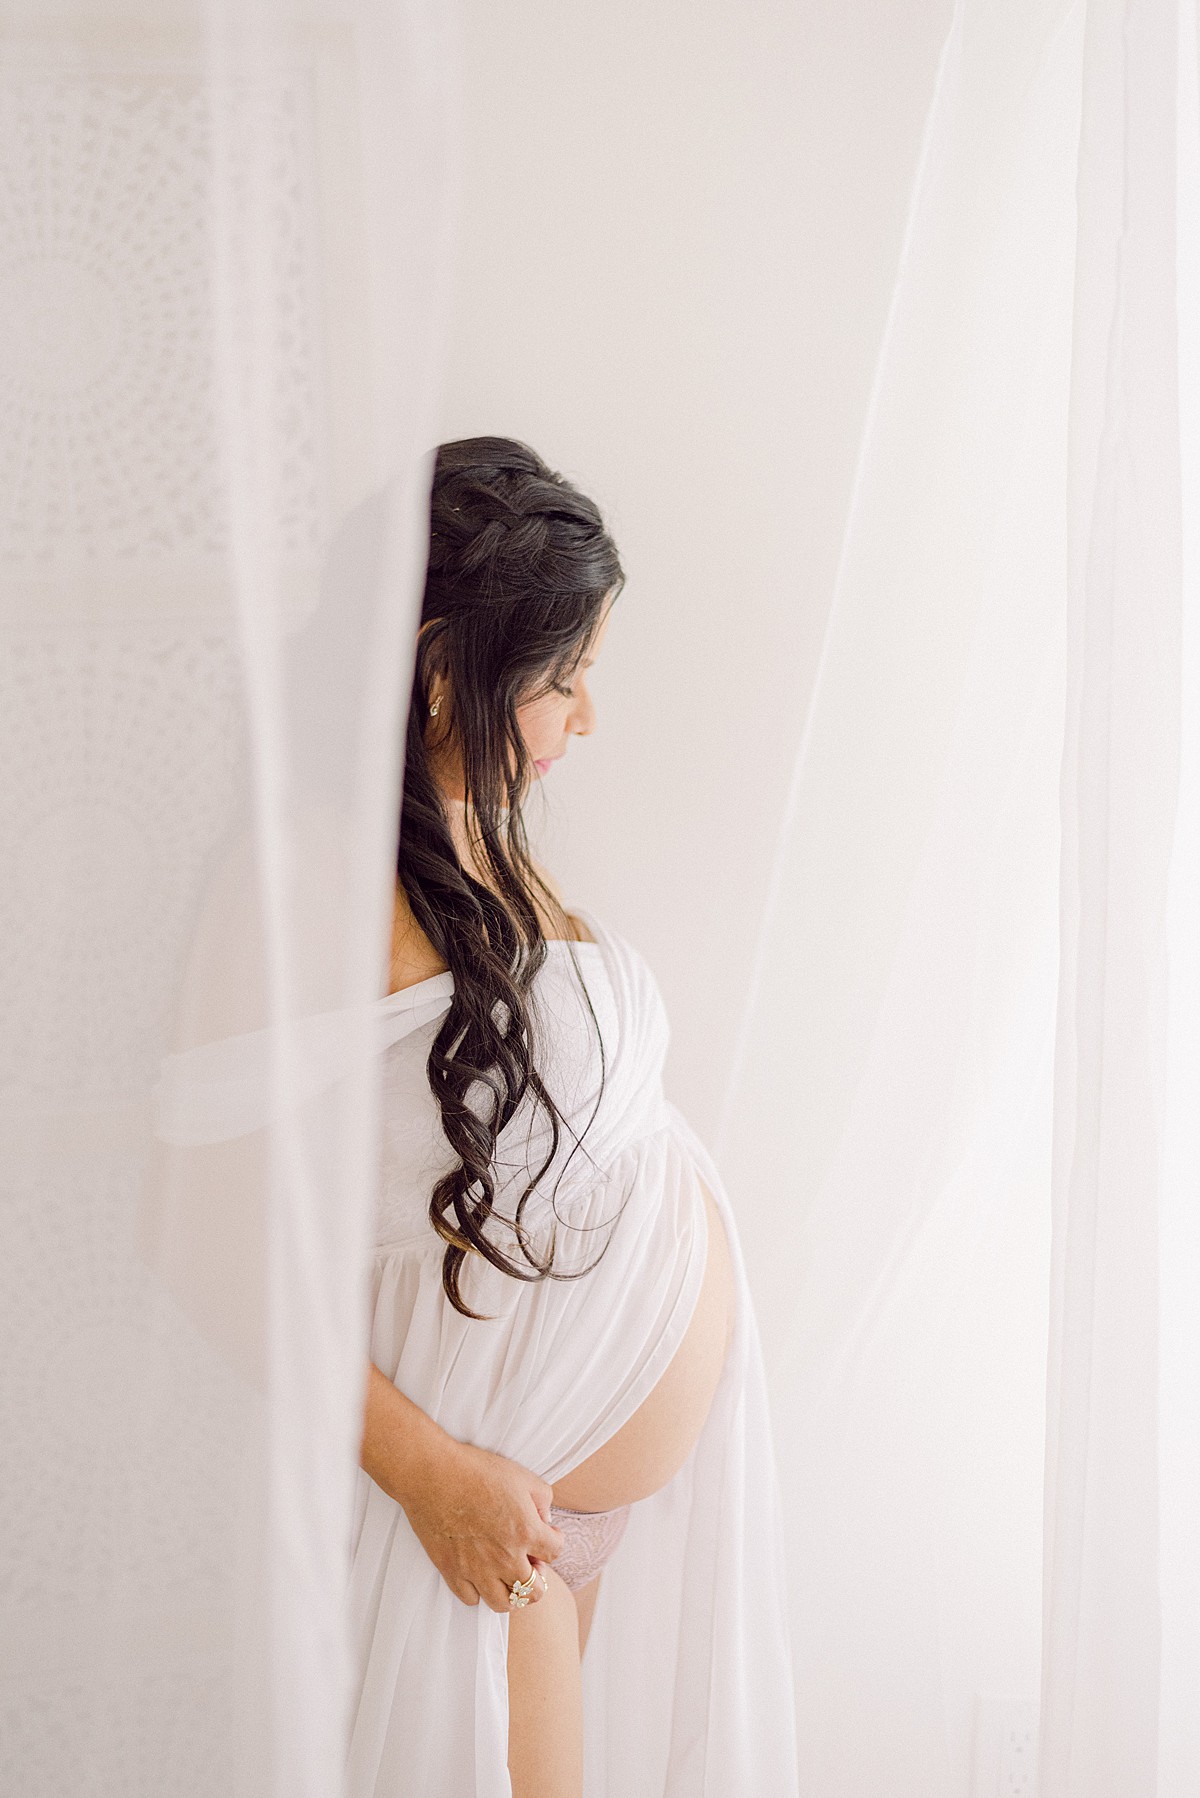 Pregnant mom standing in sheer curtains in a maternity boudoir outfit of white chiffon with baby bump exposed.